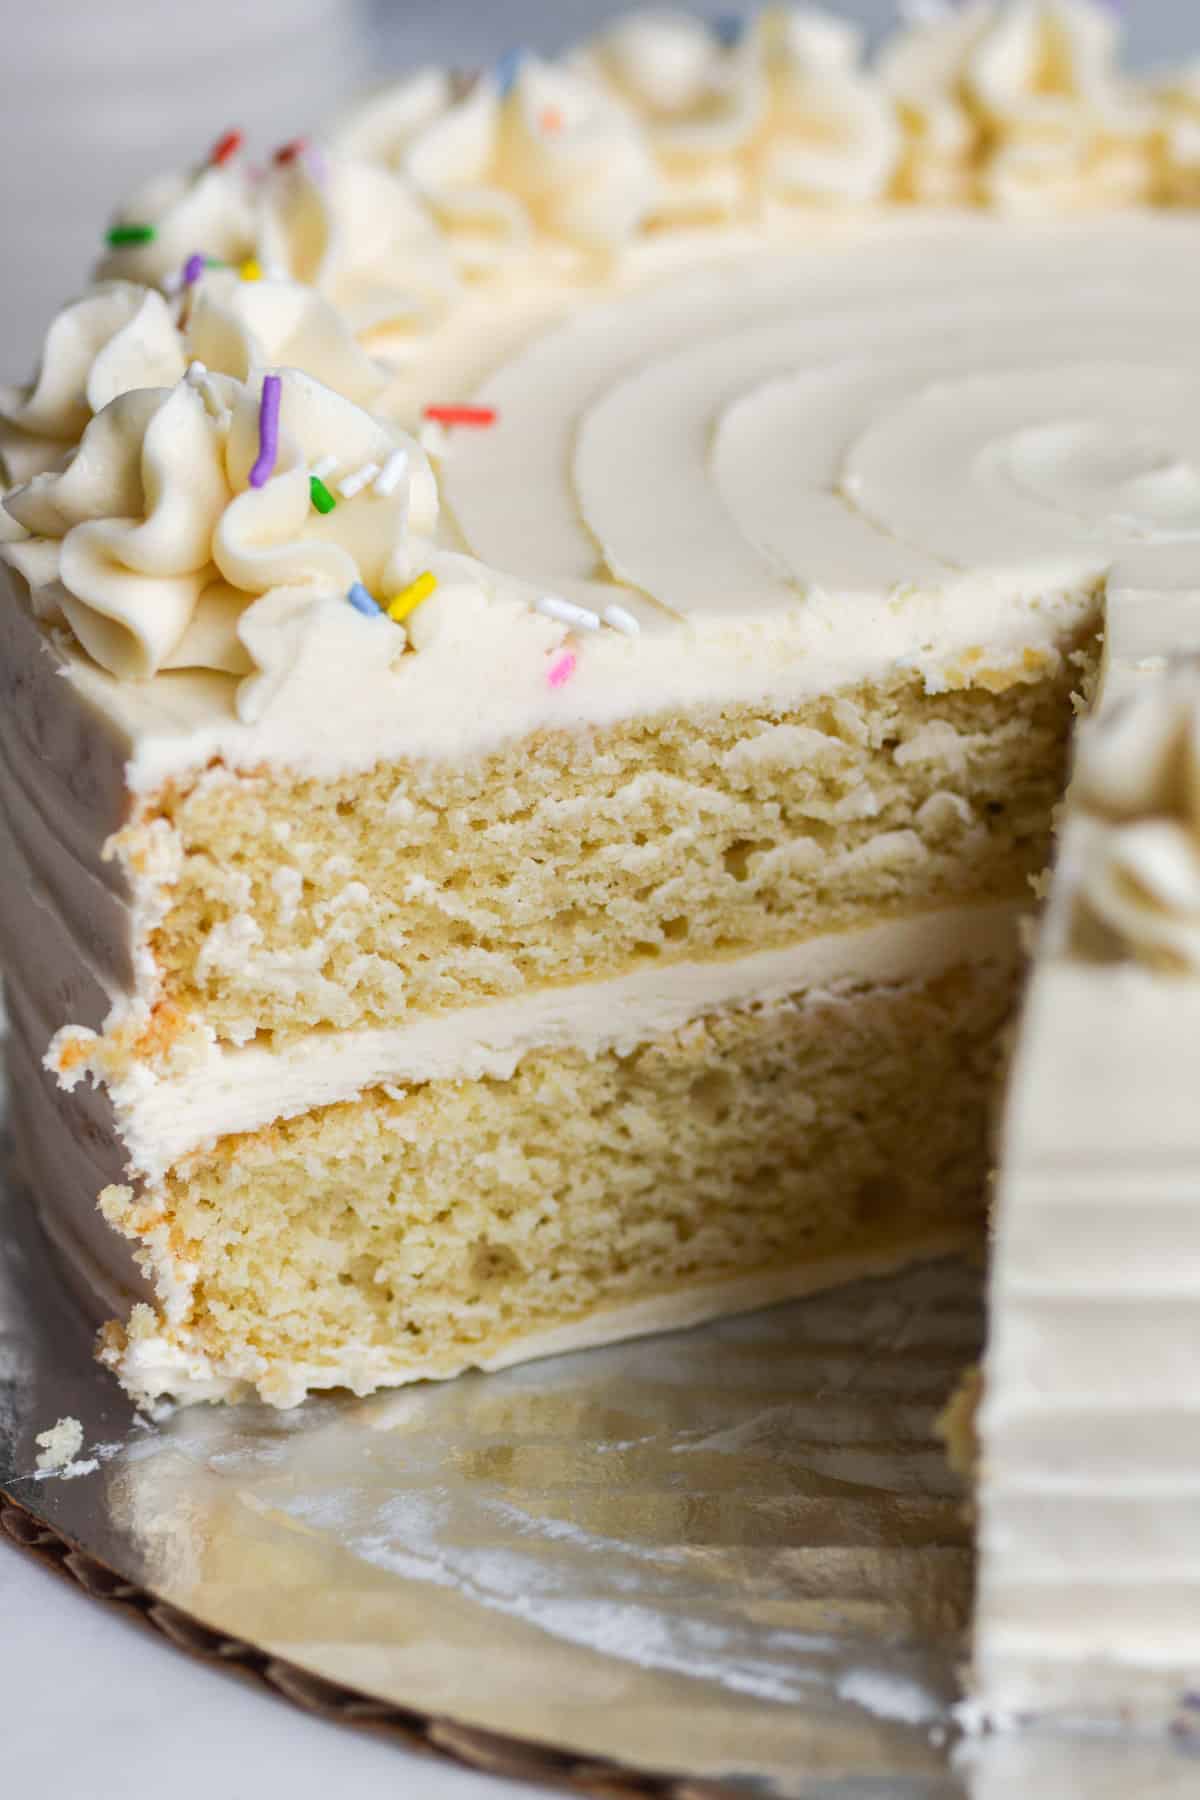 Vegan Vanilla Layer Cake with a slice taken out of it to show the texture of the inside.